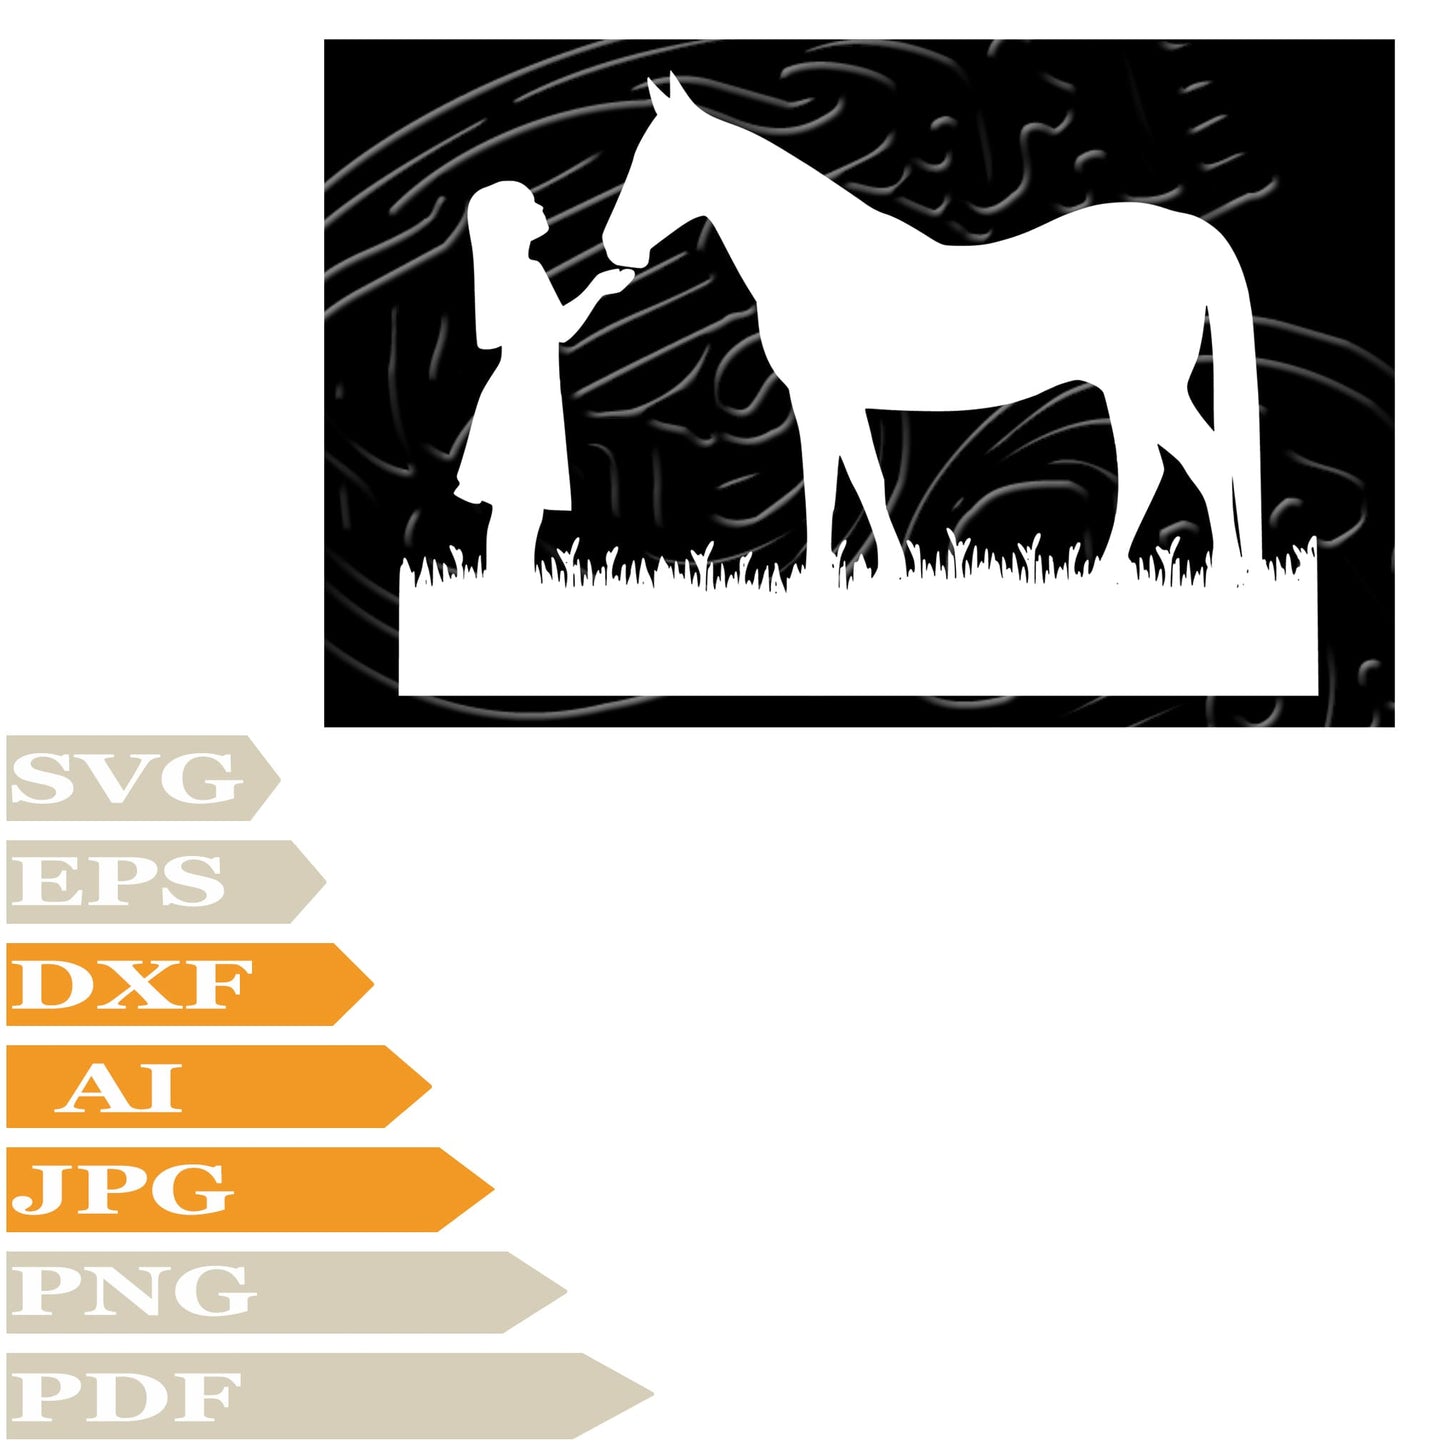 Girl, Girl With Horse Svg File, Image Cut, Png, For Tattoo, Silhouette, Digital Vector Download, Cut File, Clipart, For Cricut